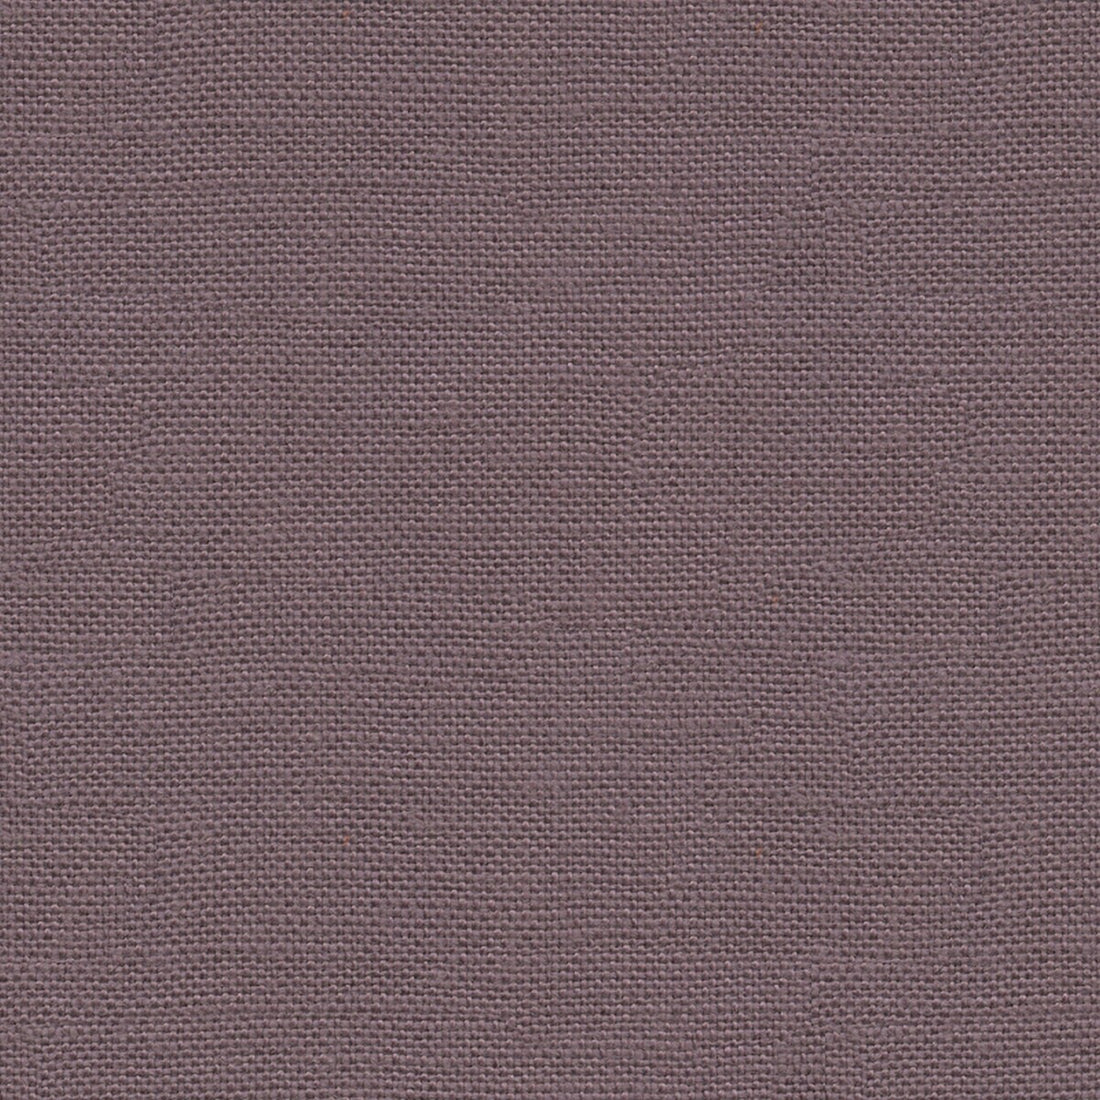 Lea fabric in mauve color - pattern J0337.578.0 - by G P &amp; J Baker in the Crayford collection